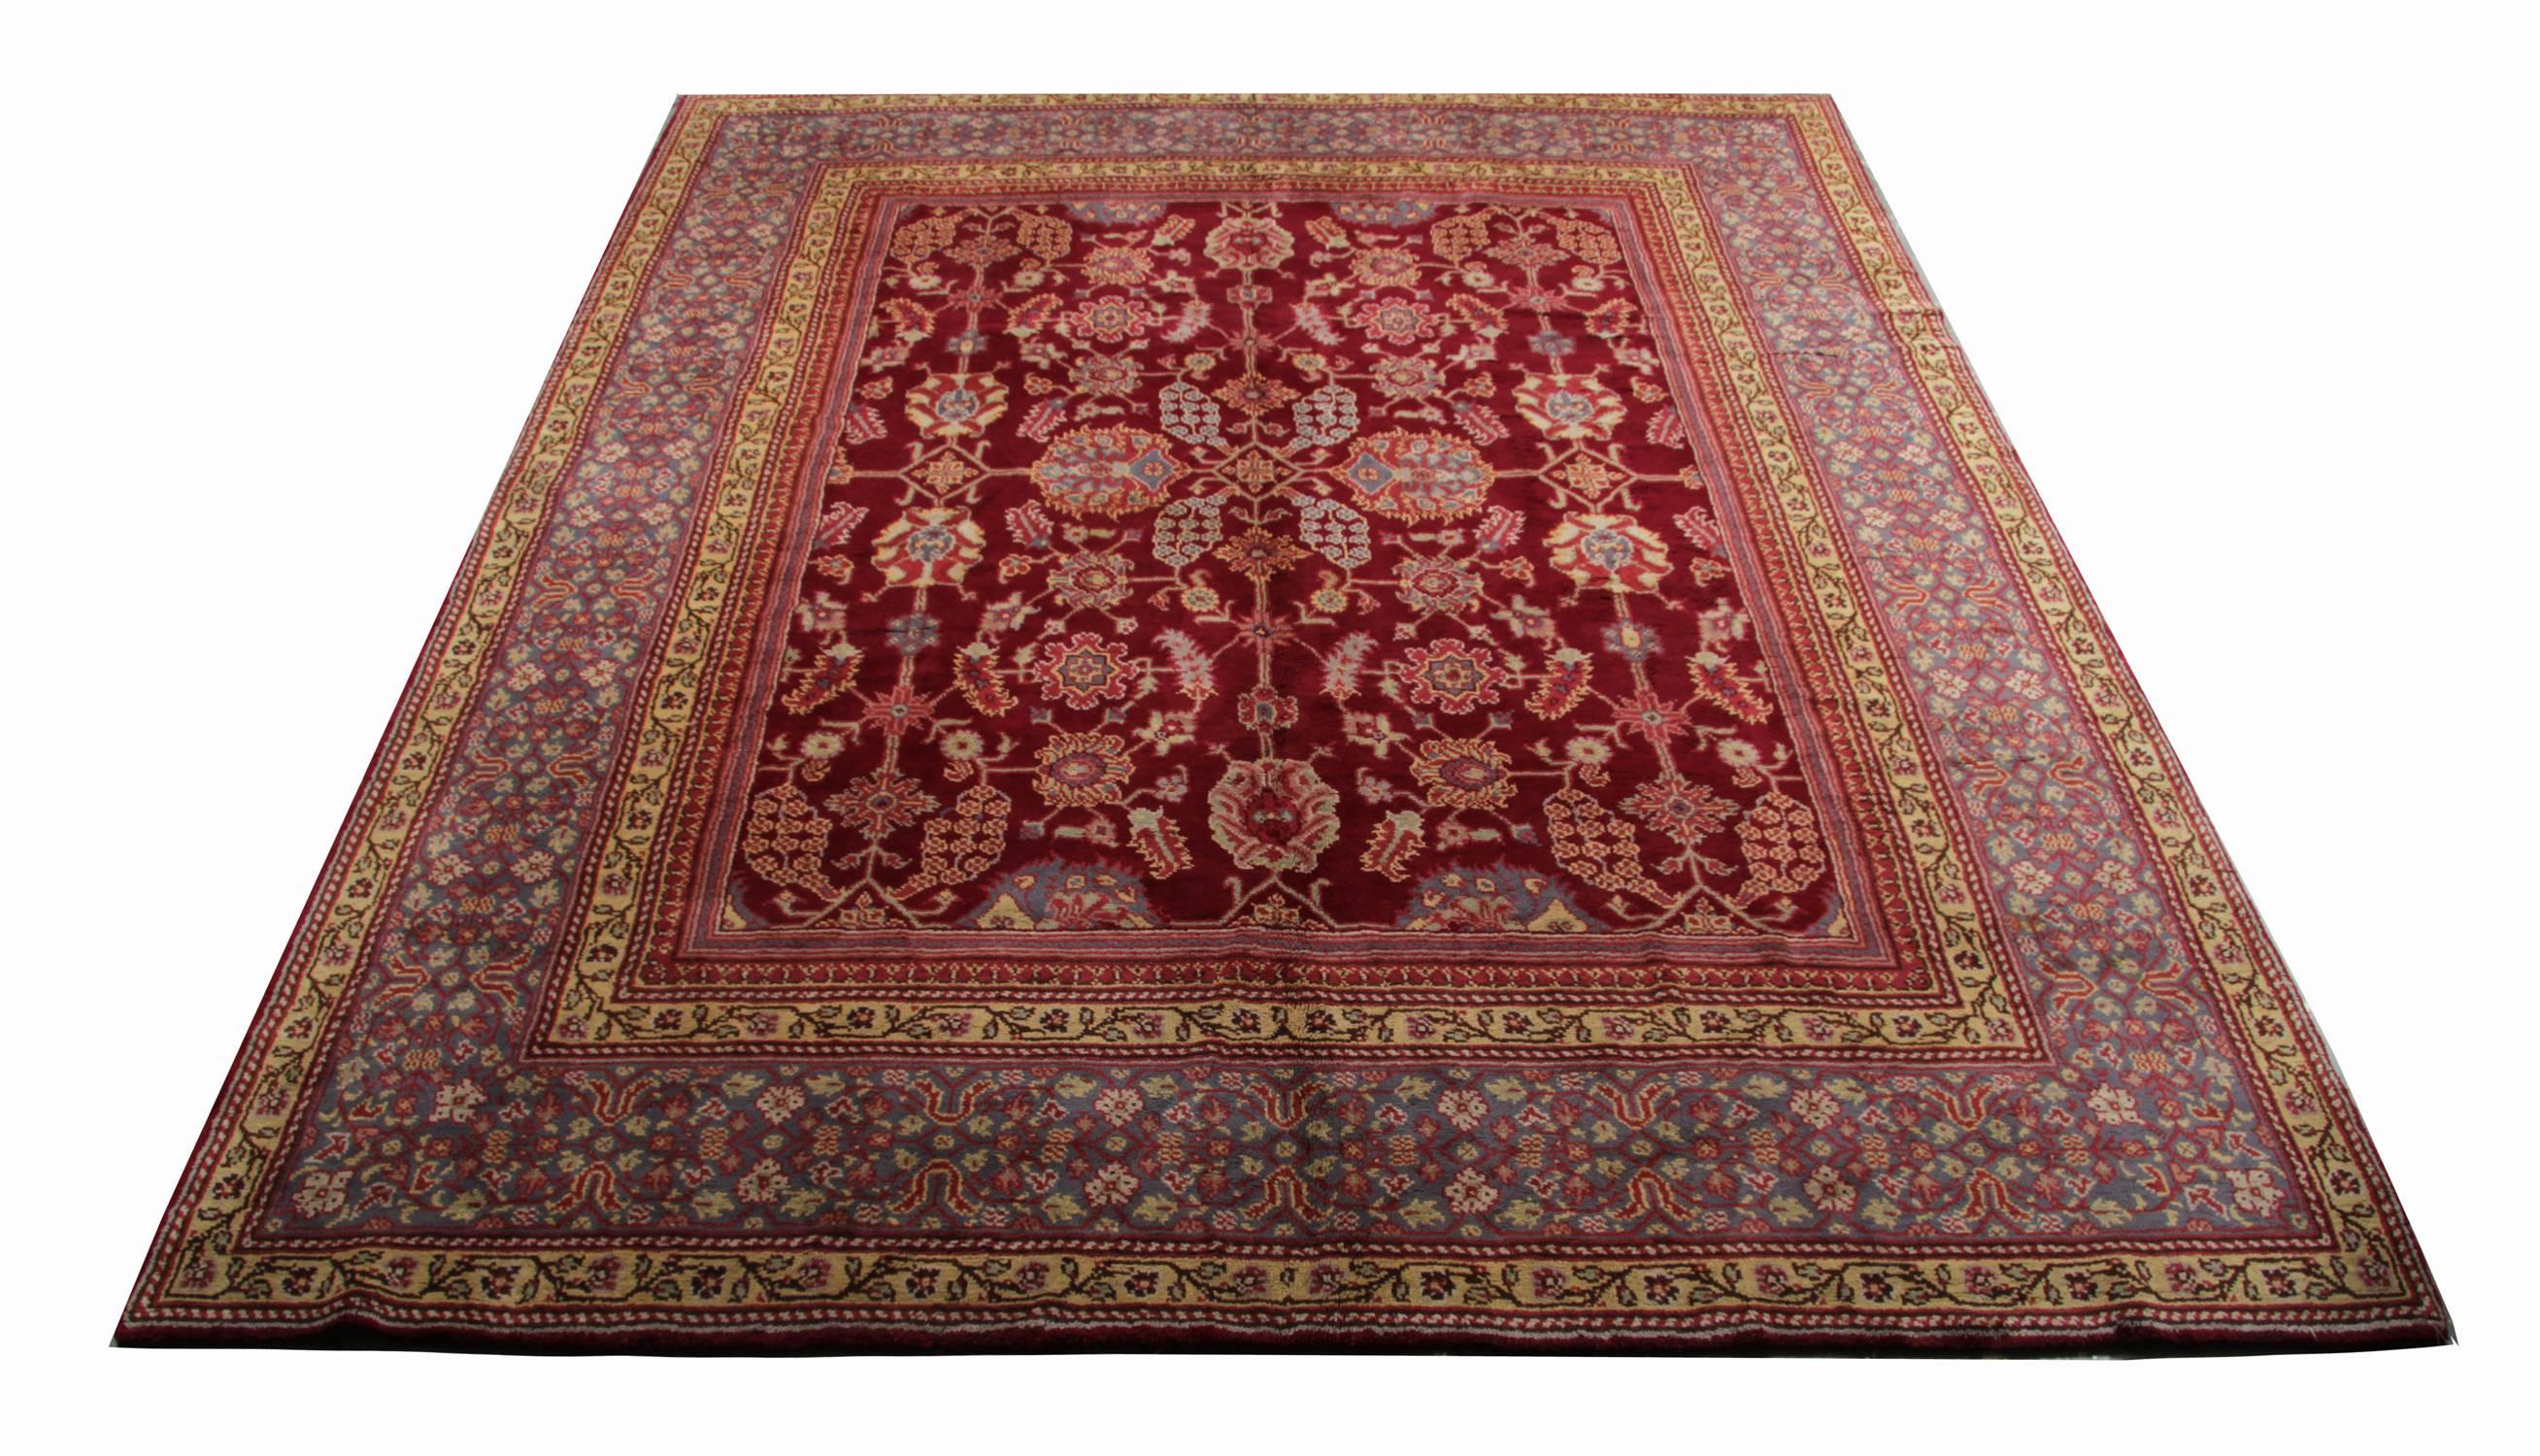 Antique English Axminster handmade carpet is very famous as English designer rug in excellent condition, circa 1880s.
This red rug is kind of traditional patterned rugs has a most elegant design with attractive color combinations. And is a very good